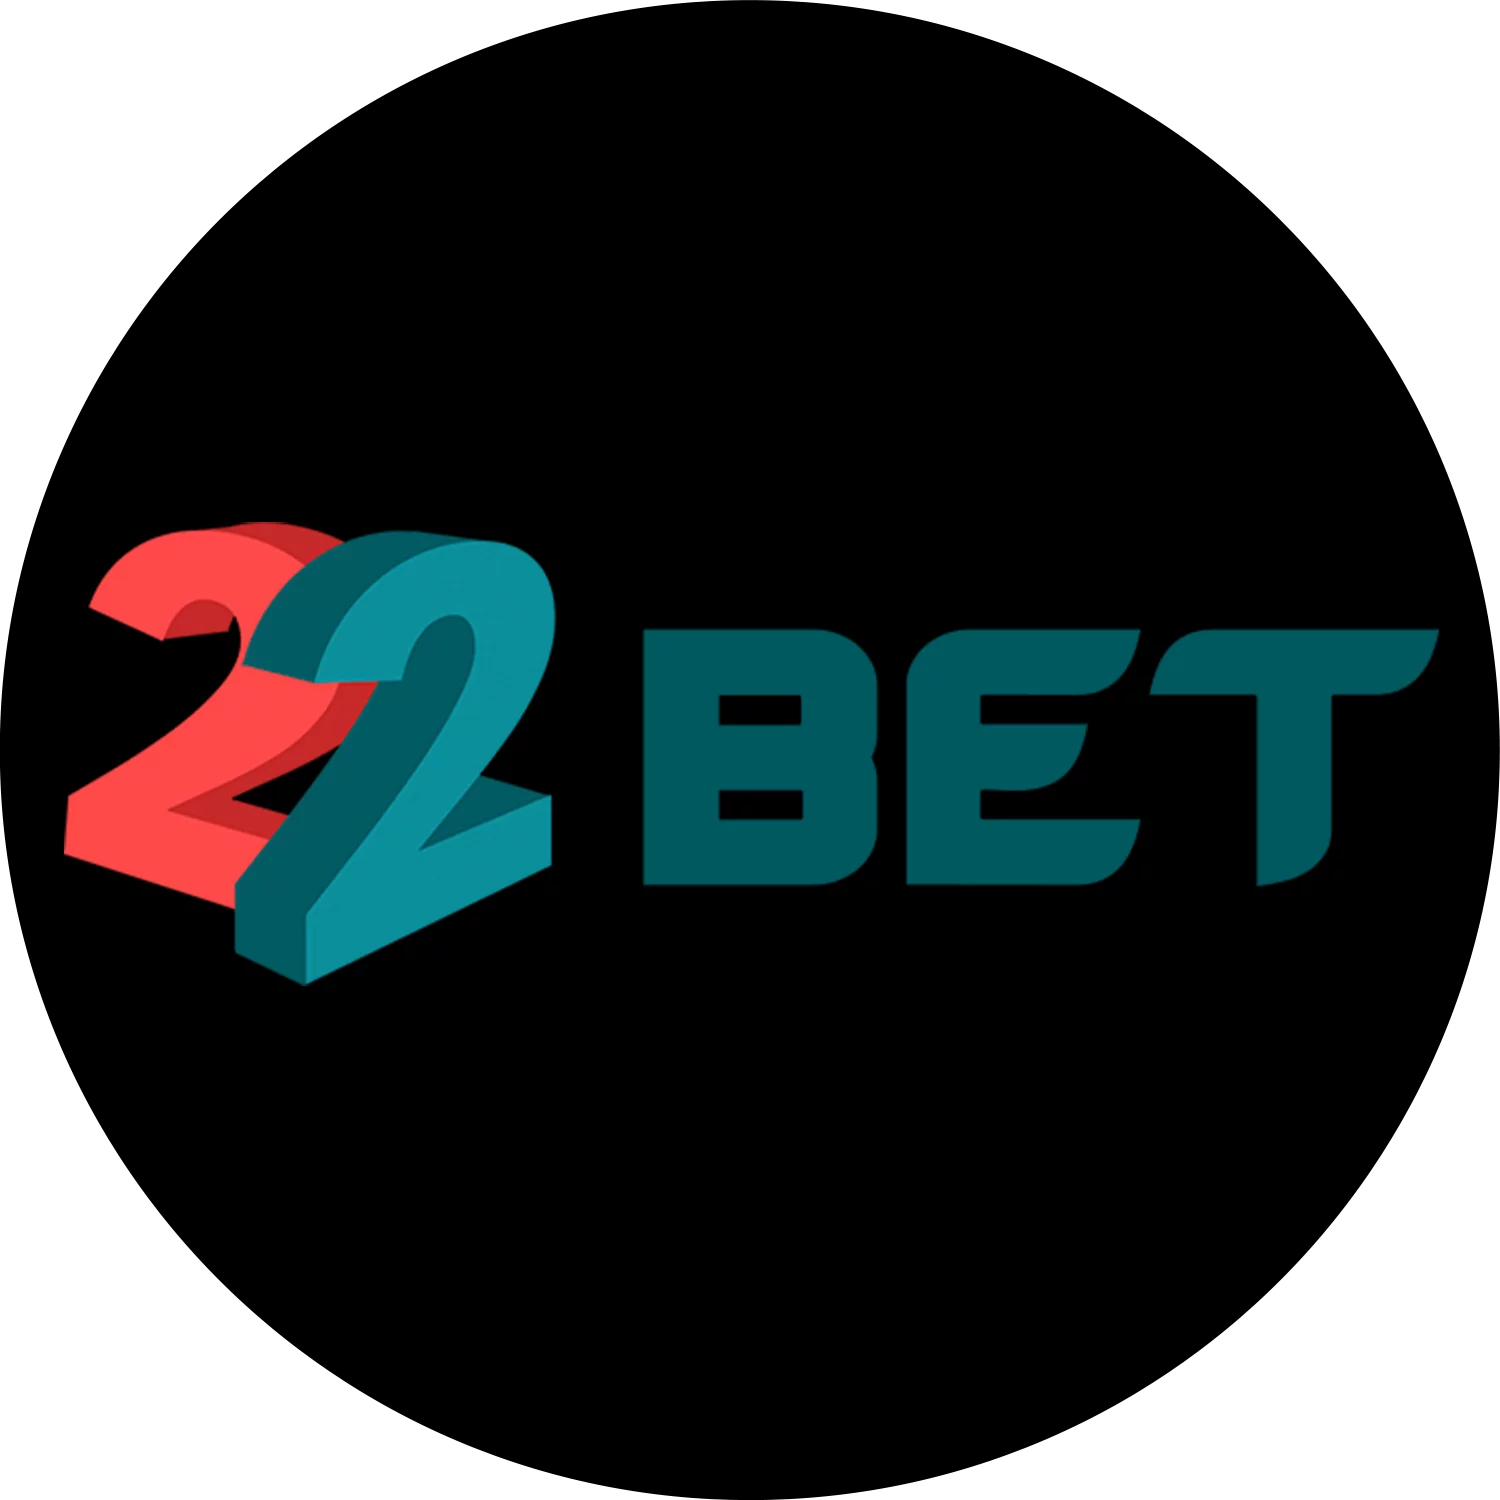 22bet is a great casino for Indian players.